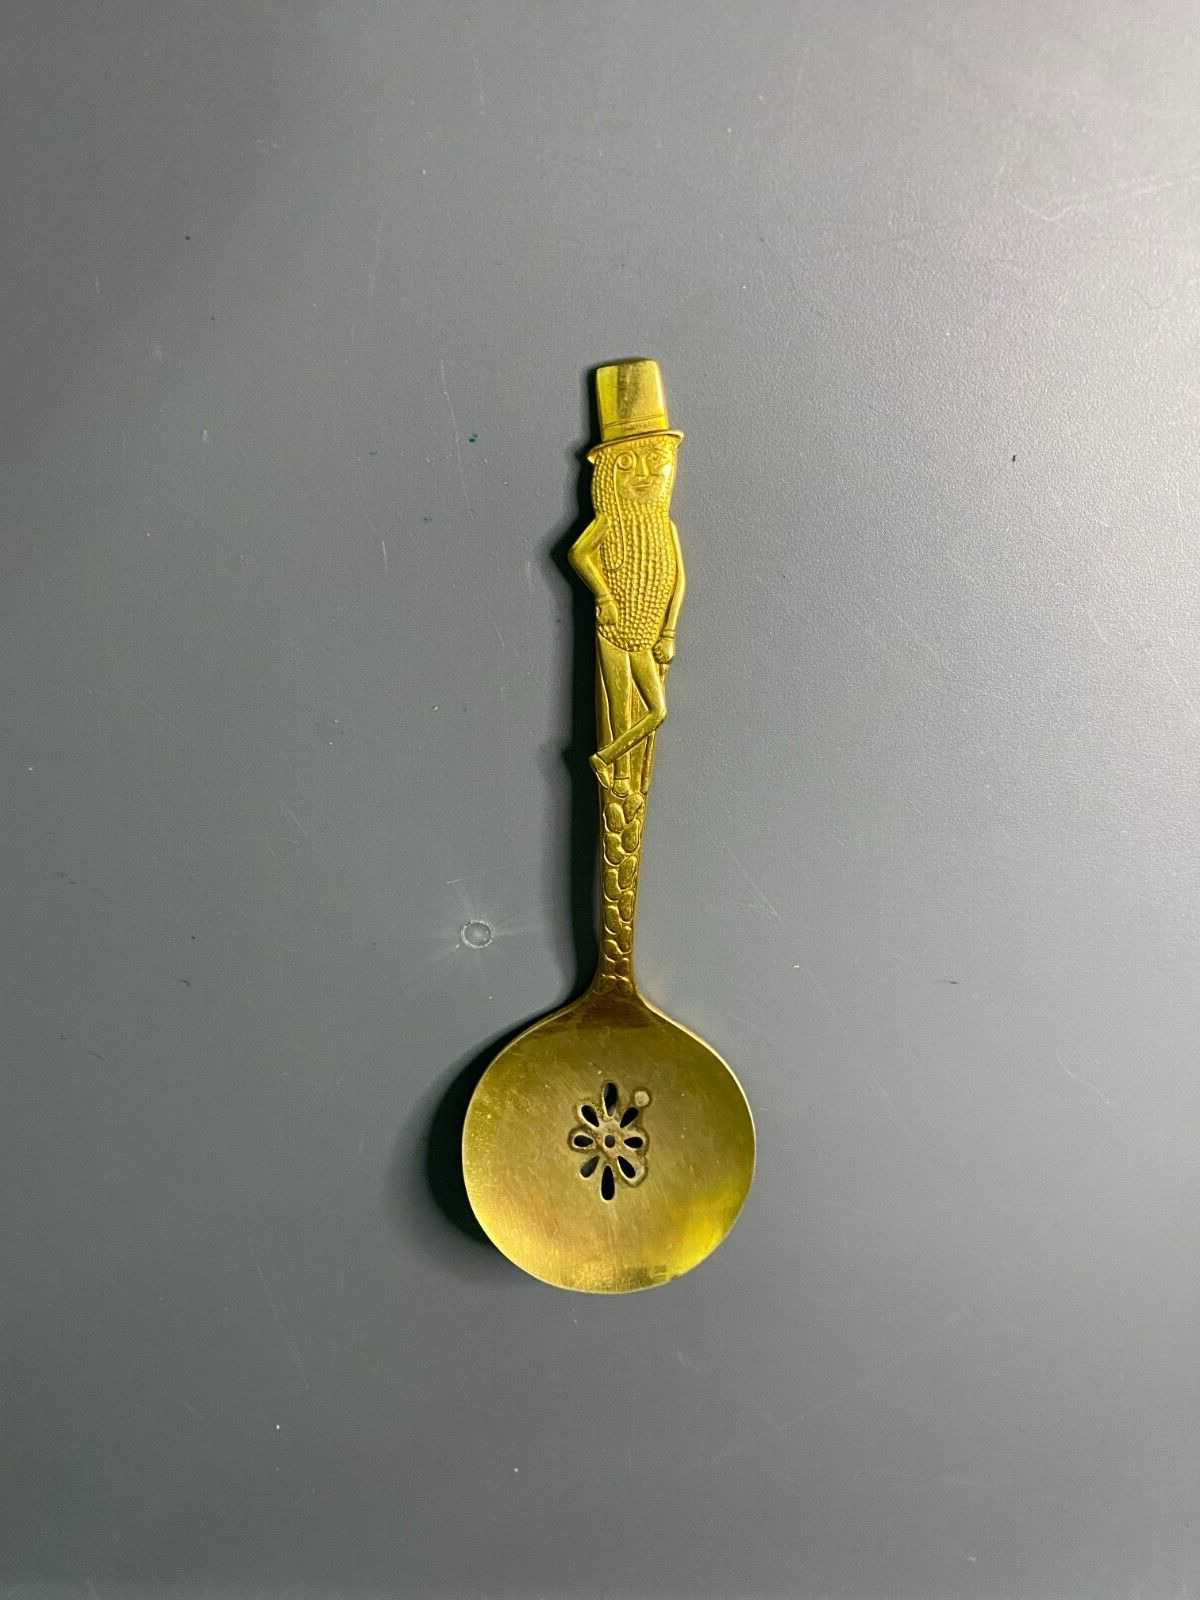 Vintage Mr. Peanut Themed Serving Spoon Gold Tone Advertising Swag